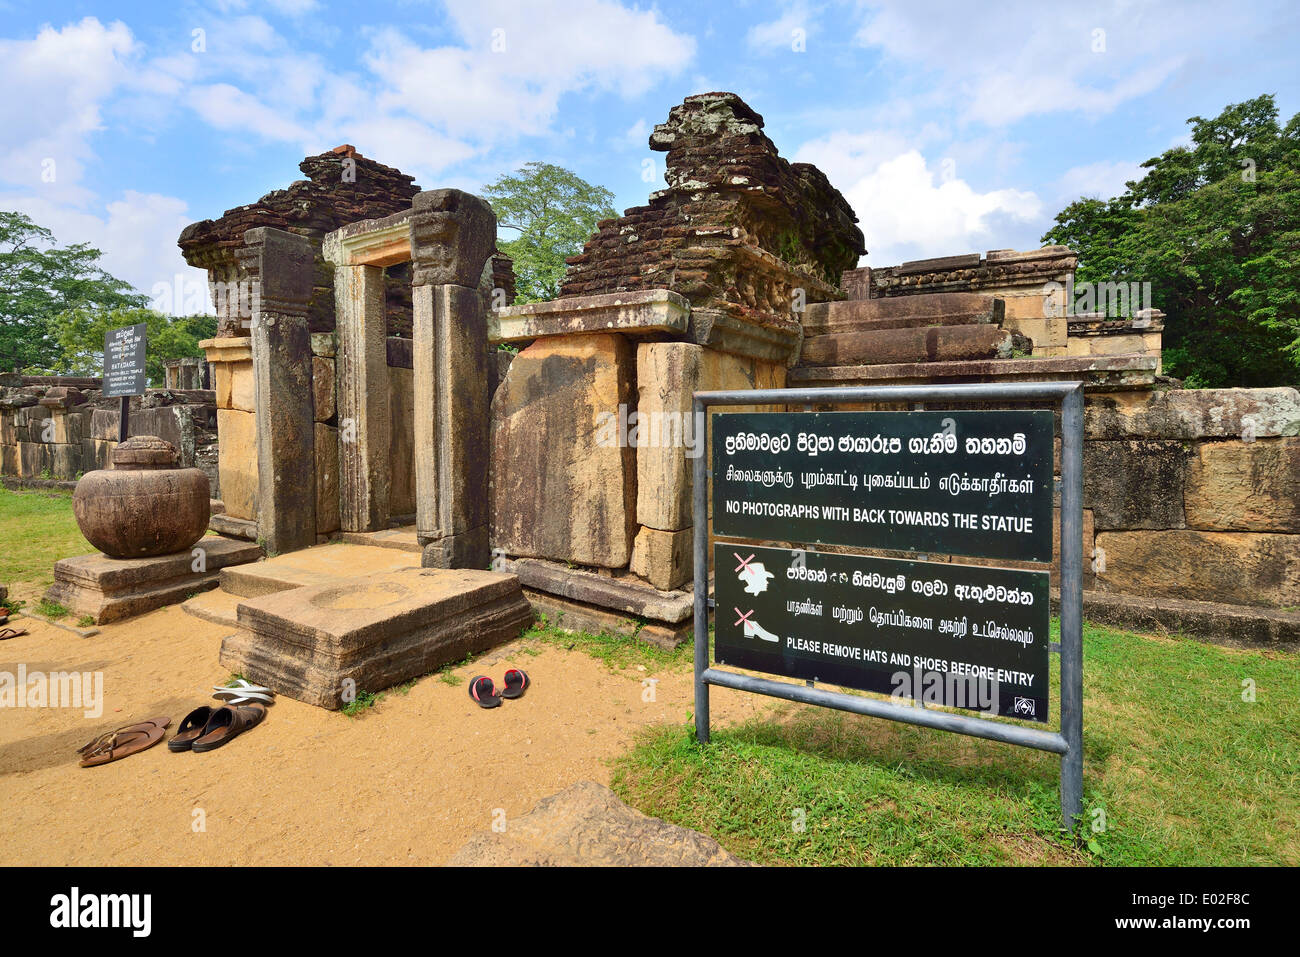 Panels with rules of etiquette in front of the Hatadage temple, UNESCO World Heritage Site, Polonnaruwa, North Central Province Stock Photo